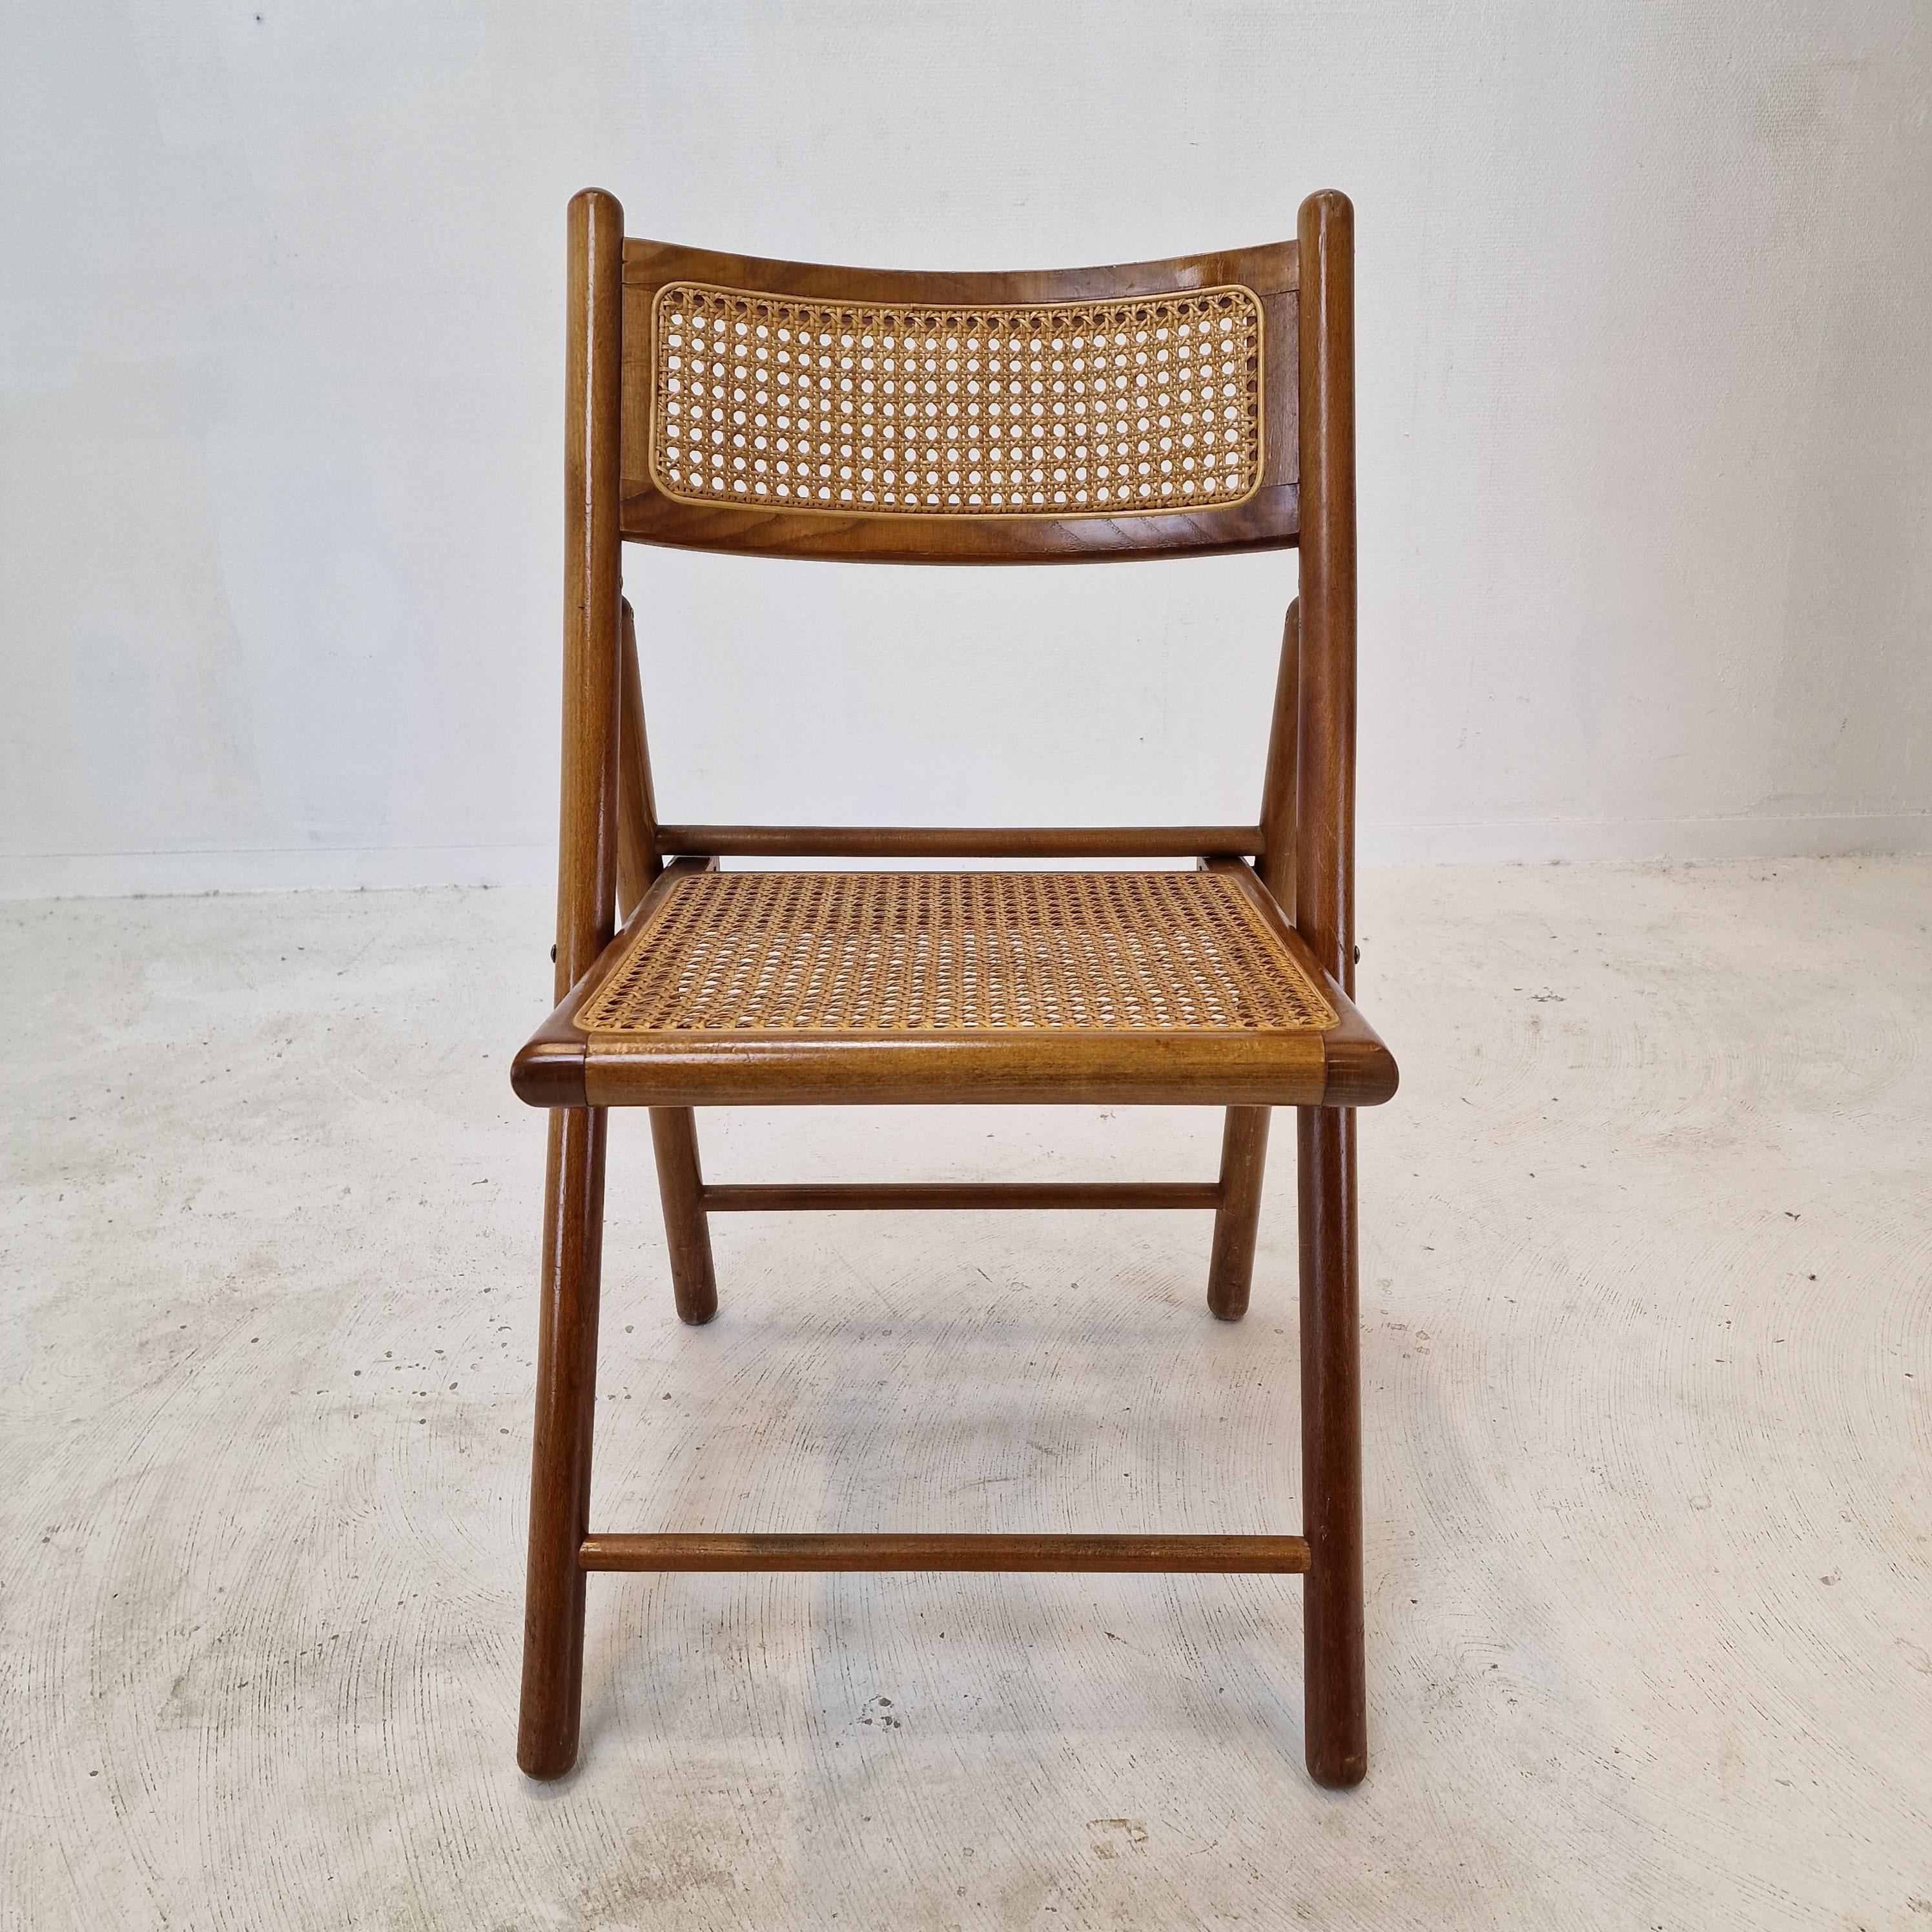 Set of 4 Italian Folding Chairs with Rattan, 1980s For Sale 5